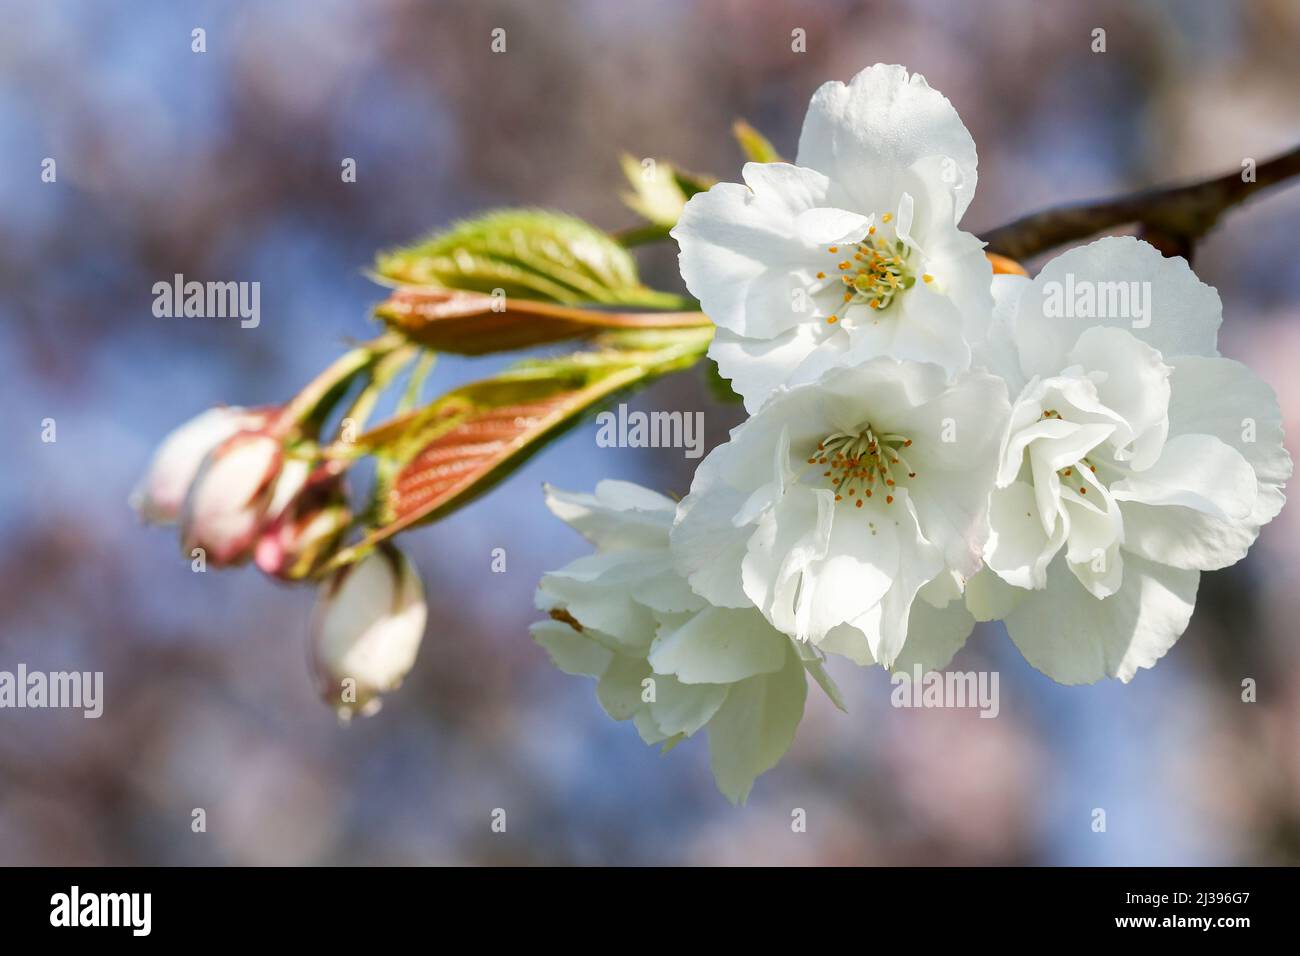 Spring buds and blossoms on 'Prunus divaricata' or 'Spreading Plum' tree. Soft pink white petals against bokeh background. Dublin, Ireland Stock Photo